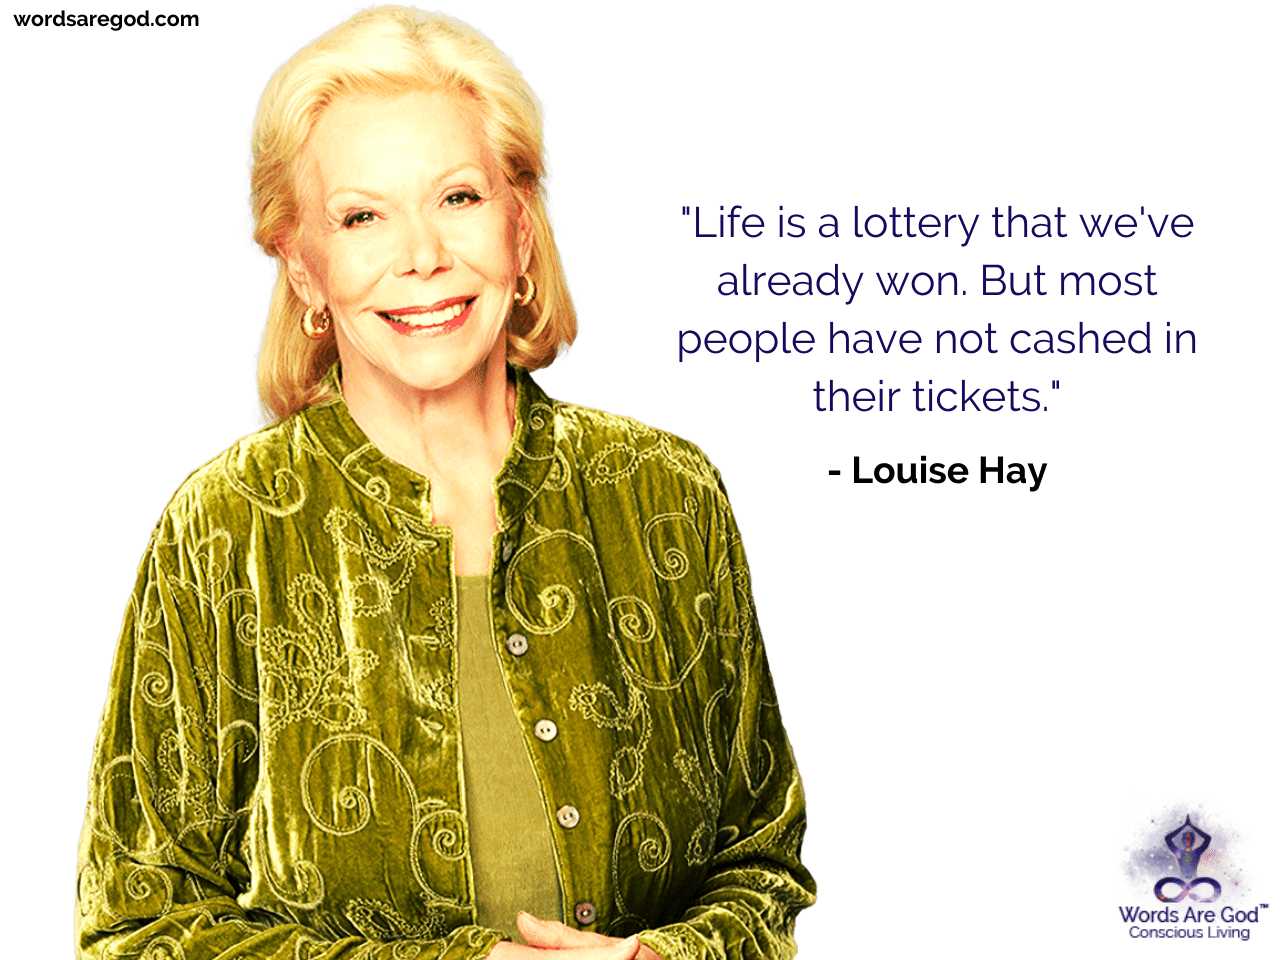 Louise Hay Inspirational Quote